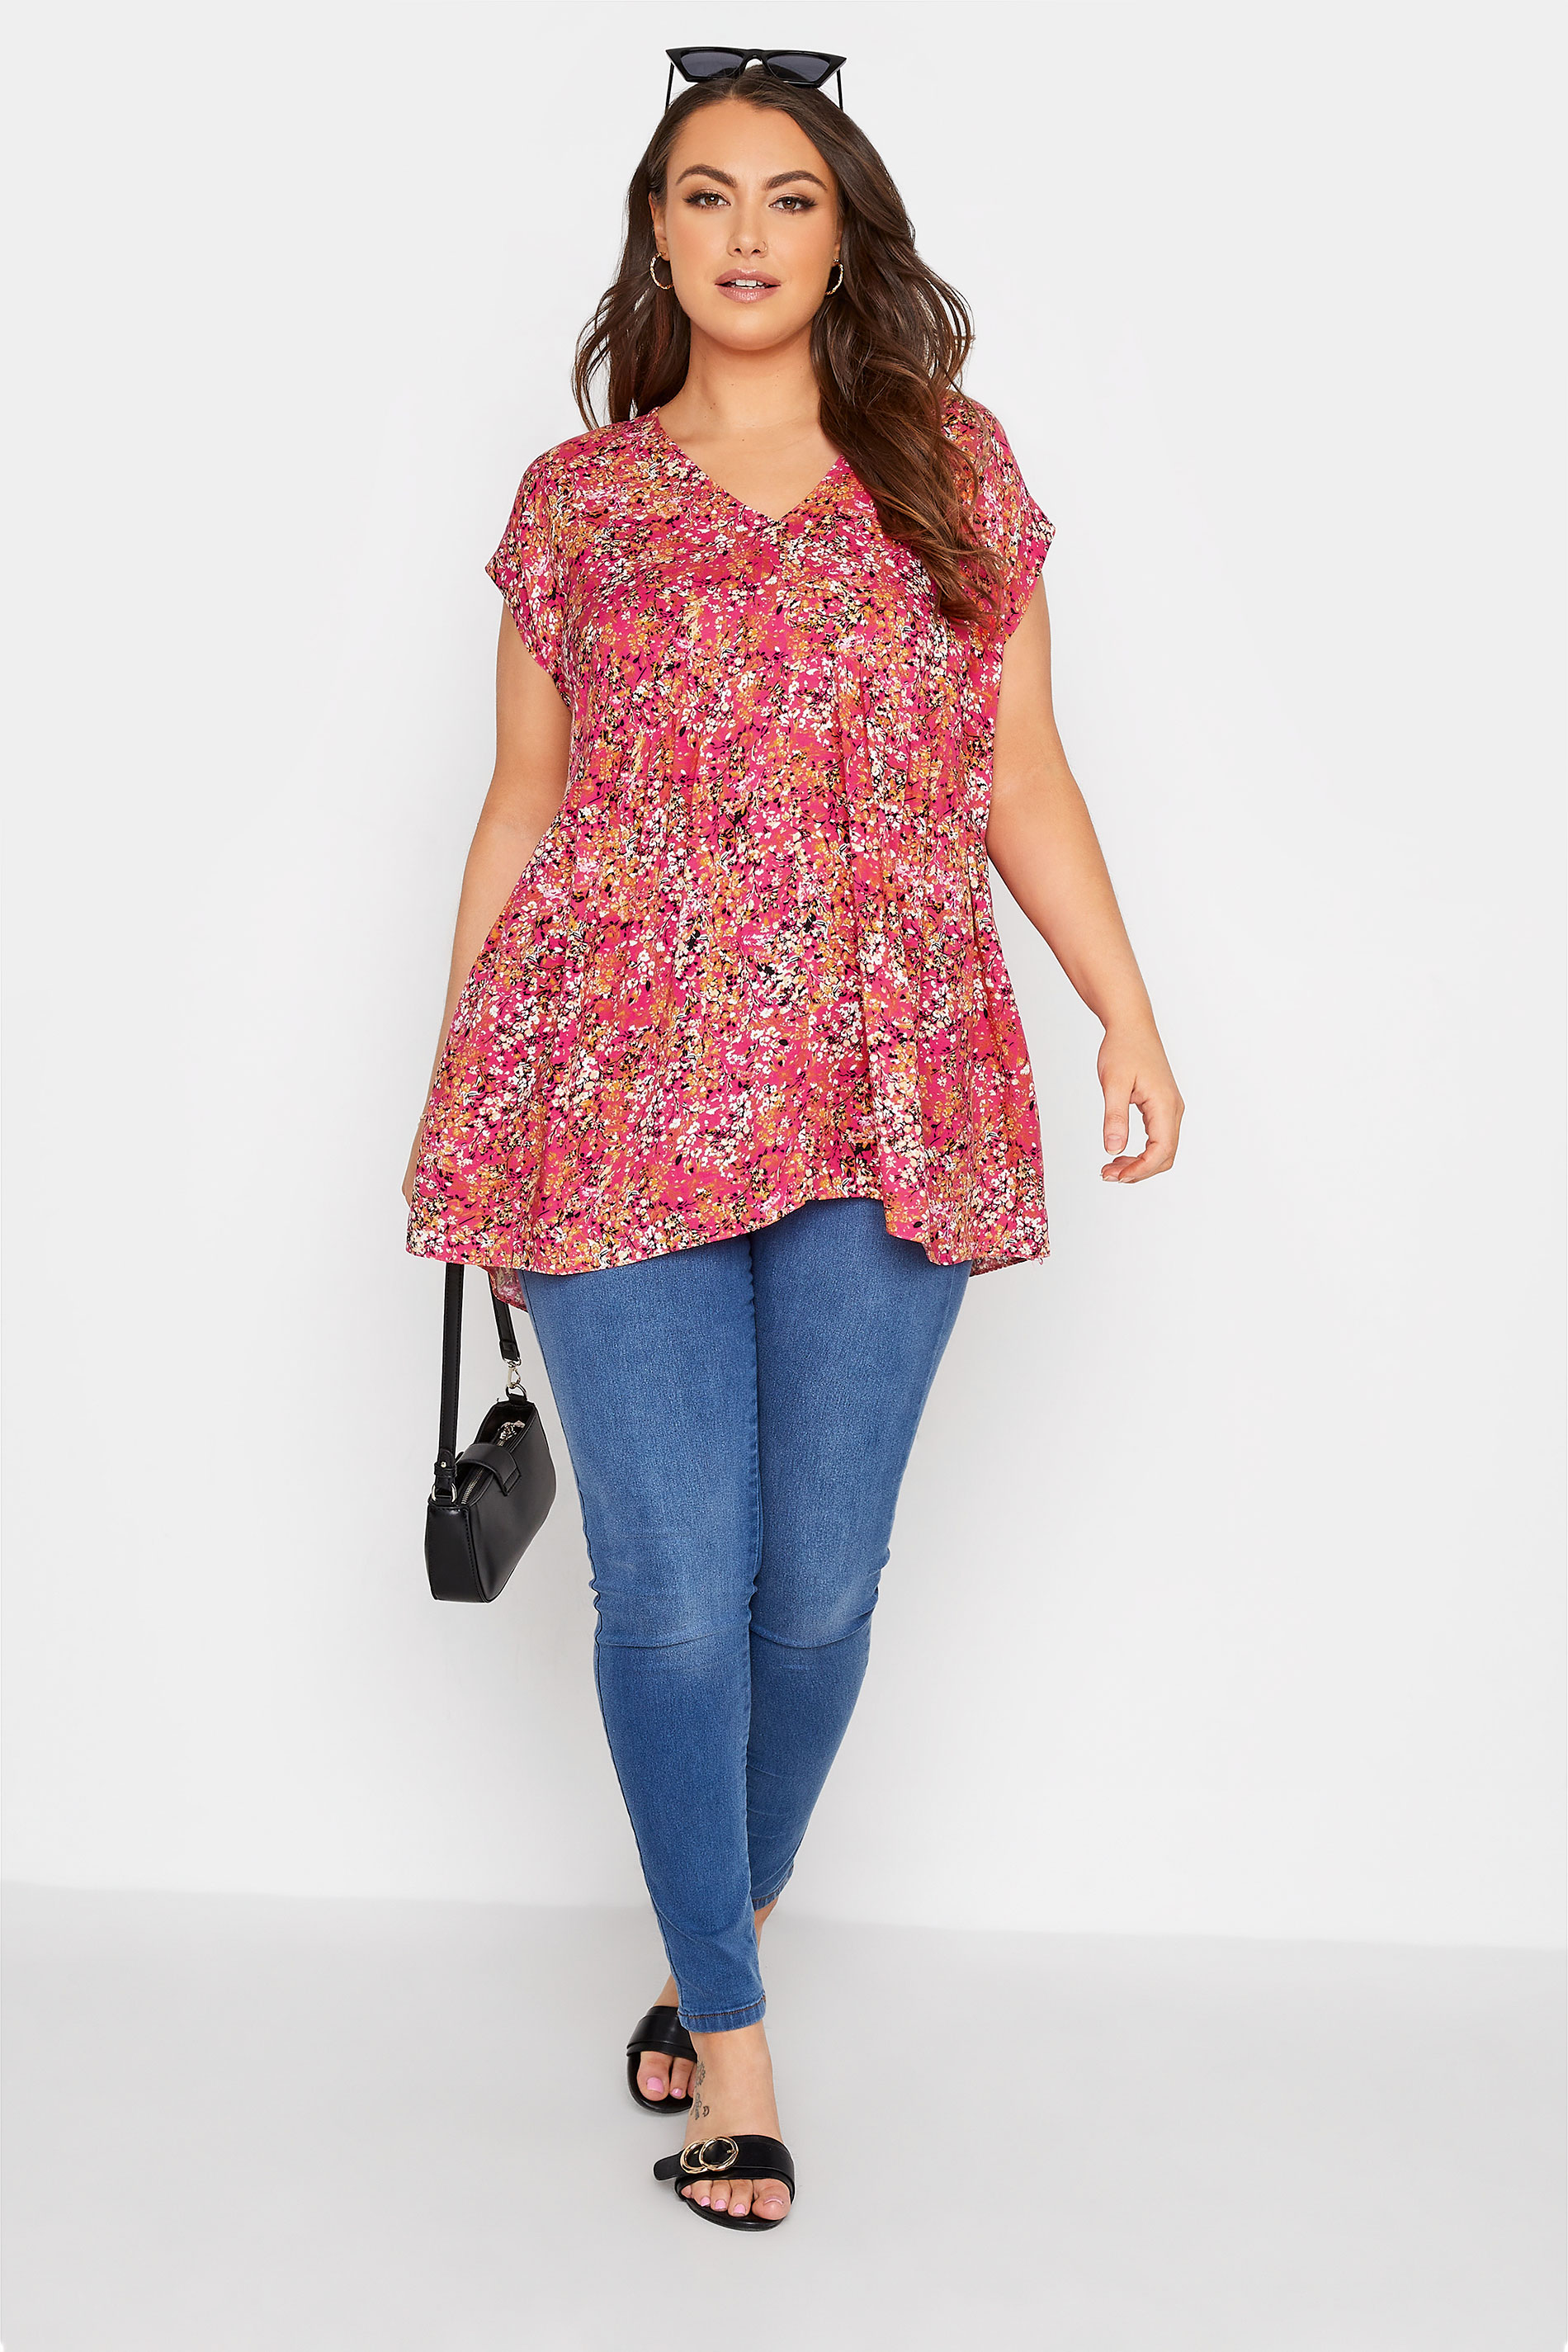 Grande taille  Tops Grande taille  Tops Ourlet Plongeant | YOURS LONDON - Tunique Rose Floral Ourlet Plongeant - RX25886